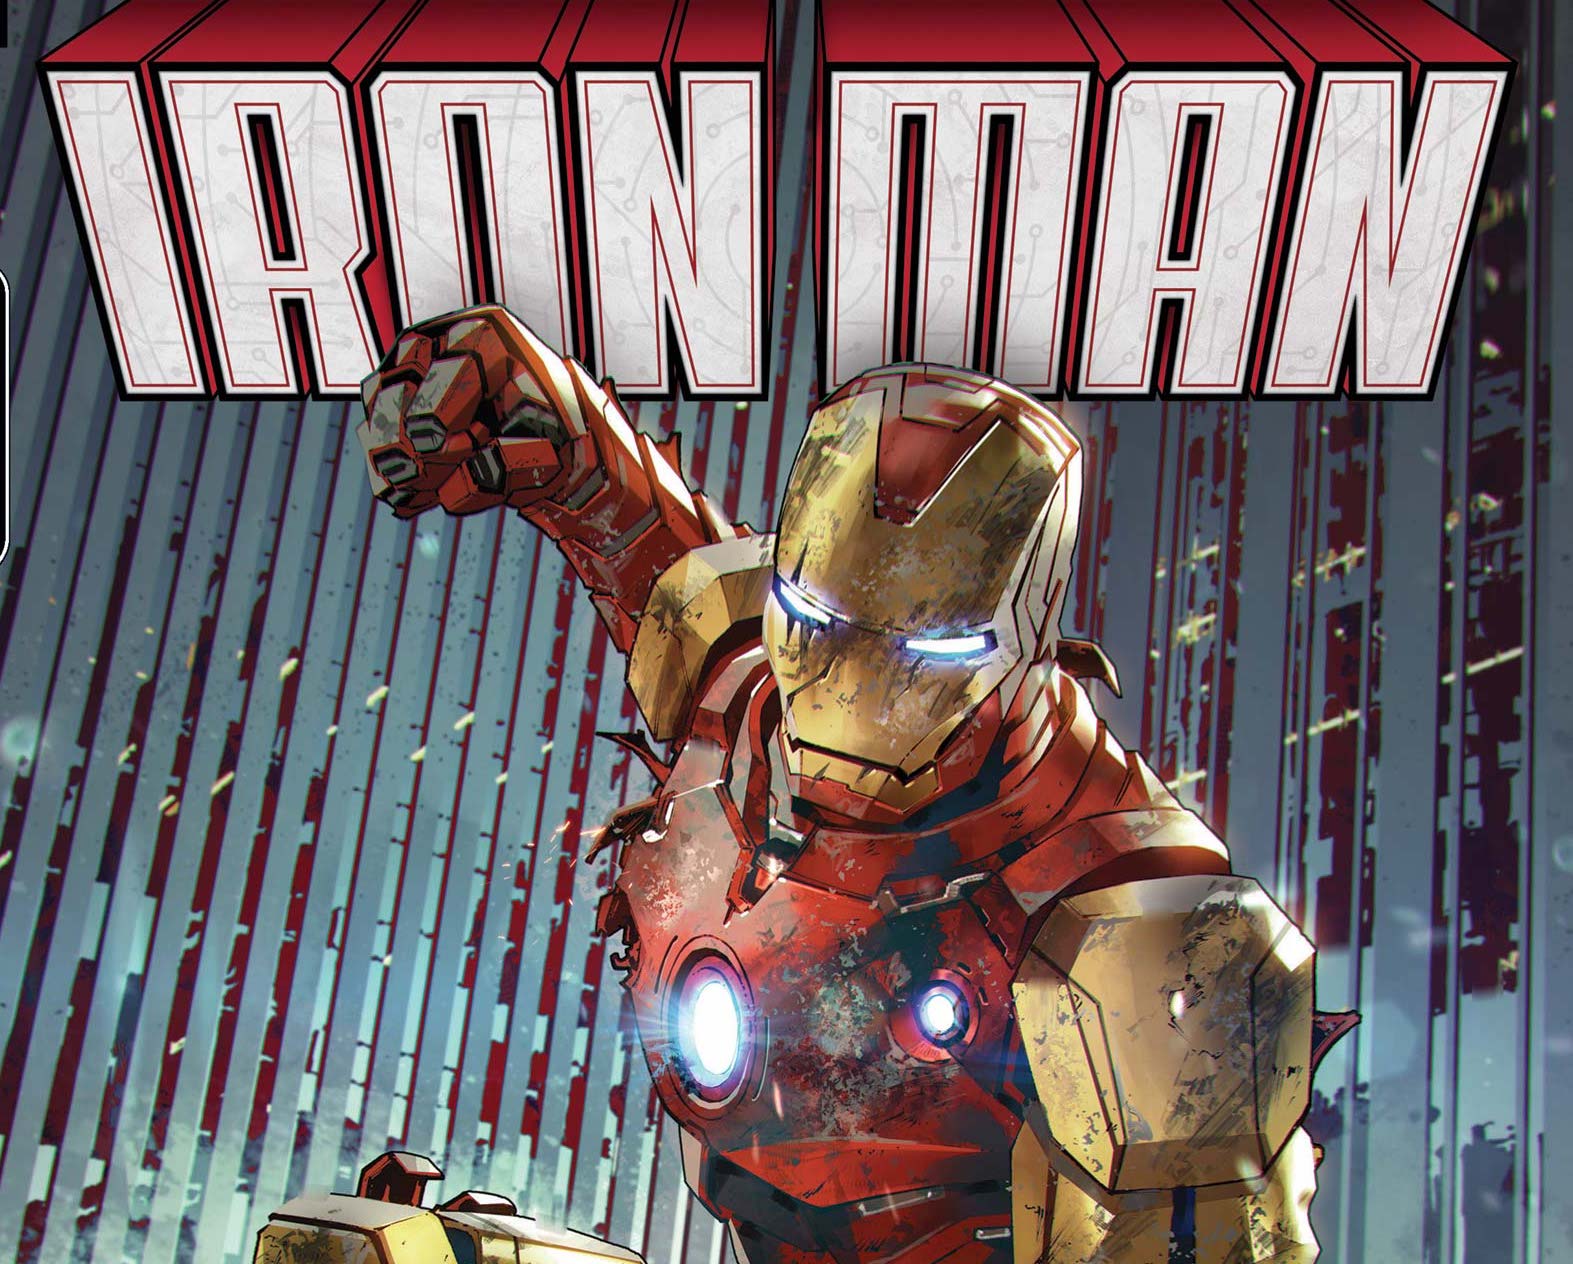 'Invincible Iron Man' #4 may be the prelude to the Fall of X